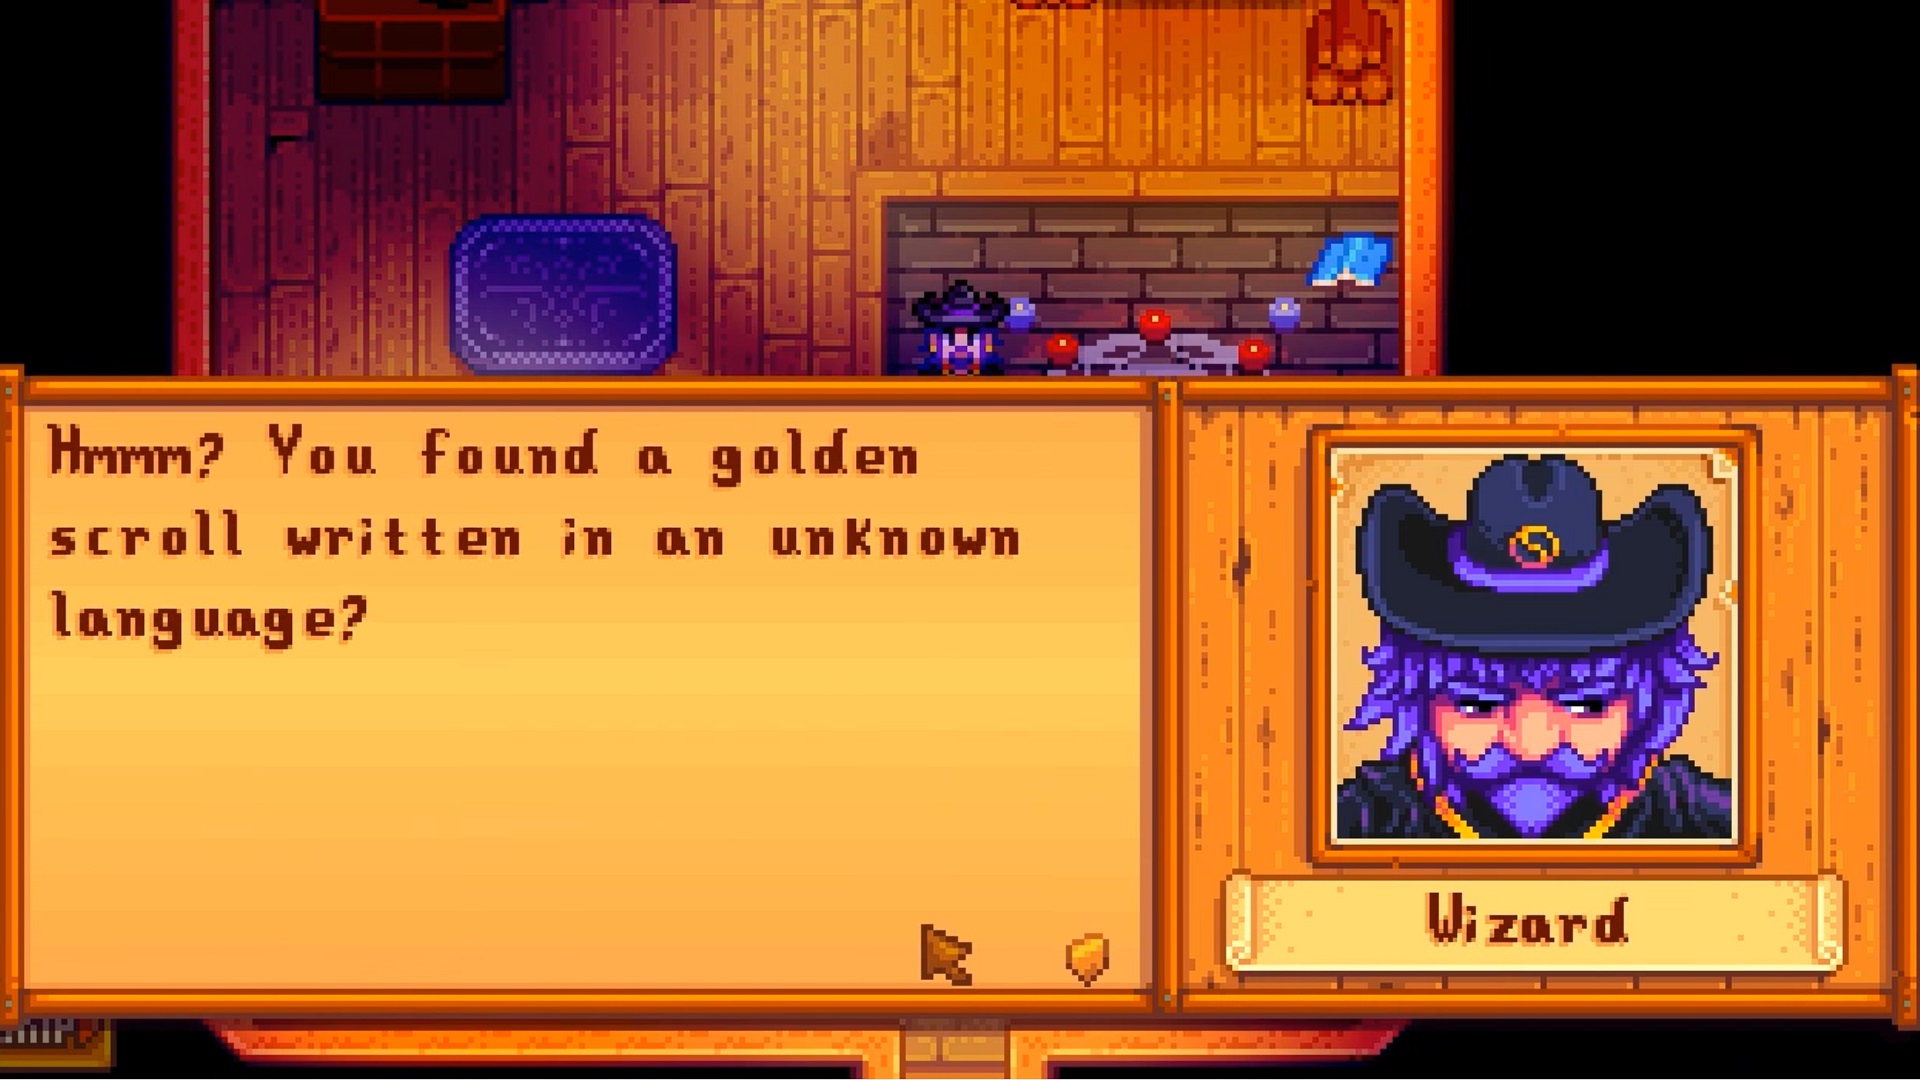 Stardew Valley's Wizard talking about a golden scroll